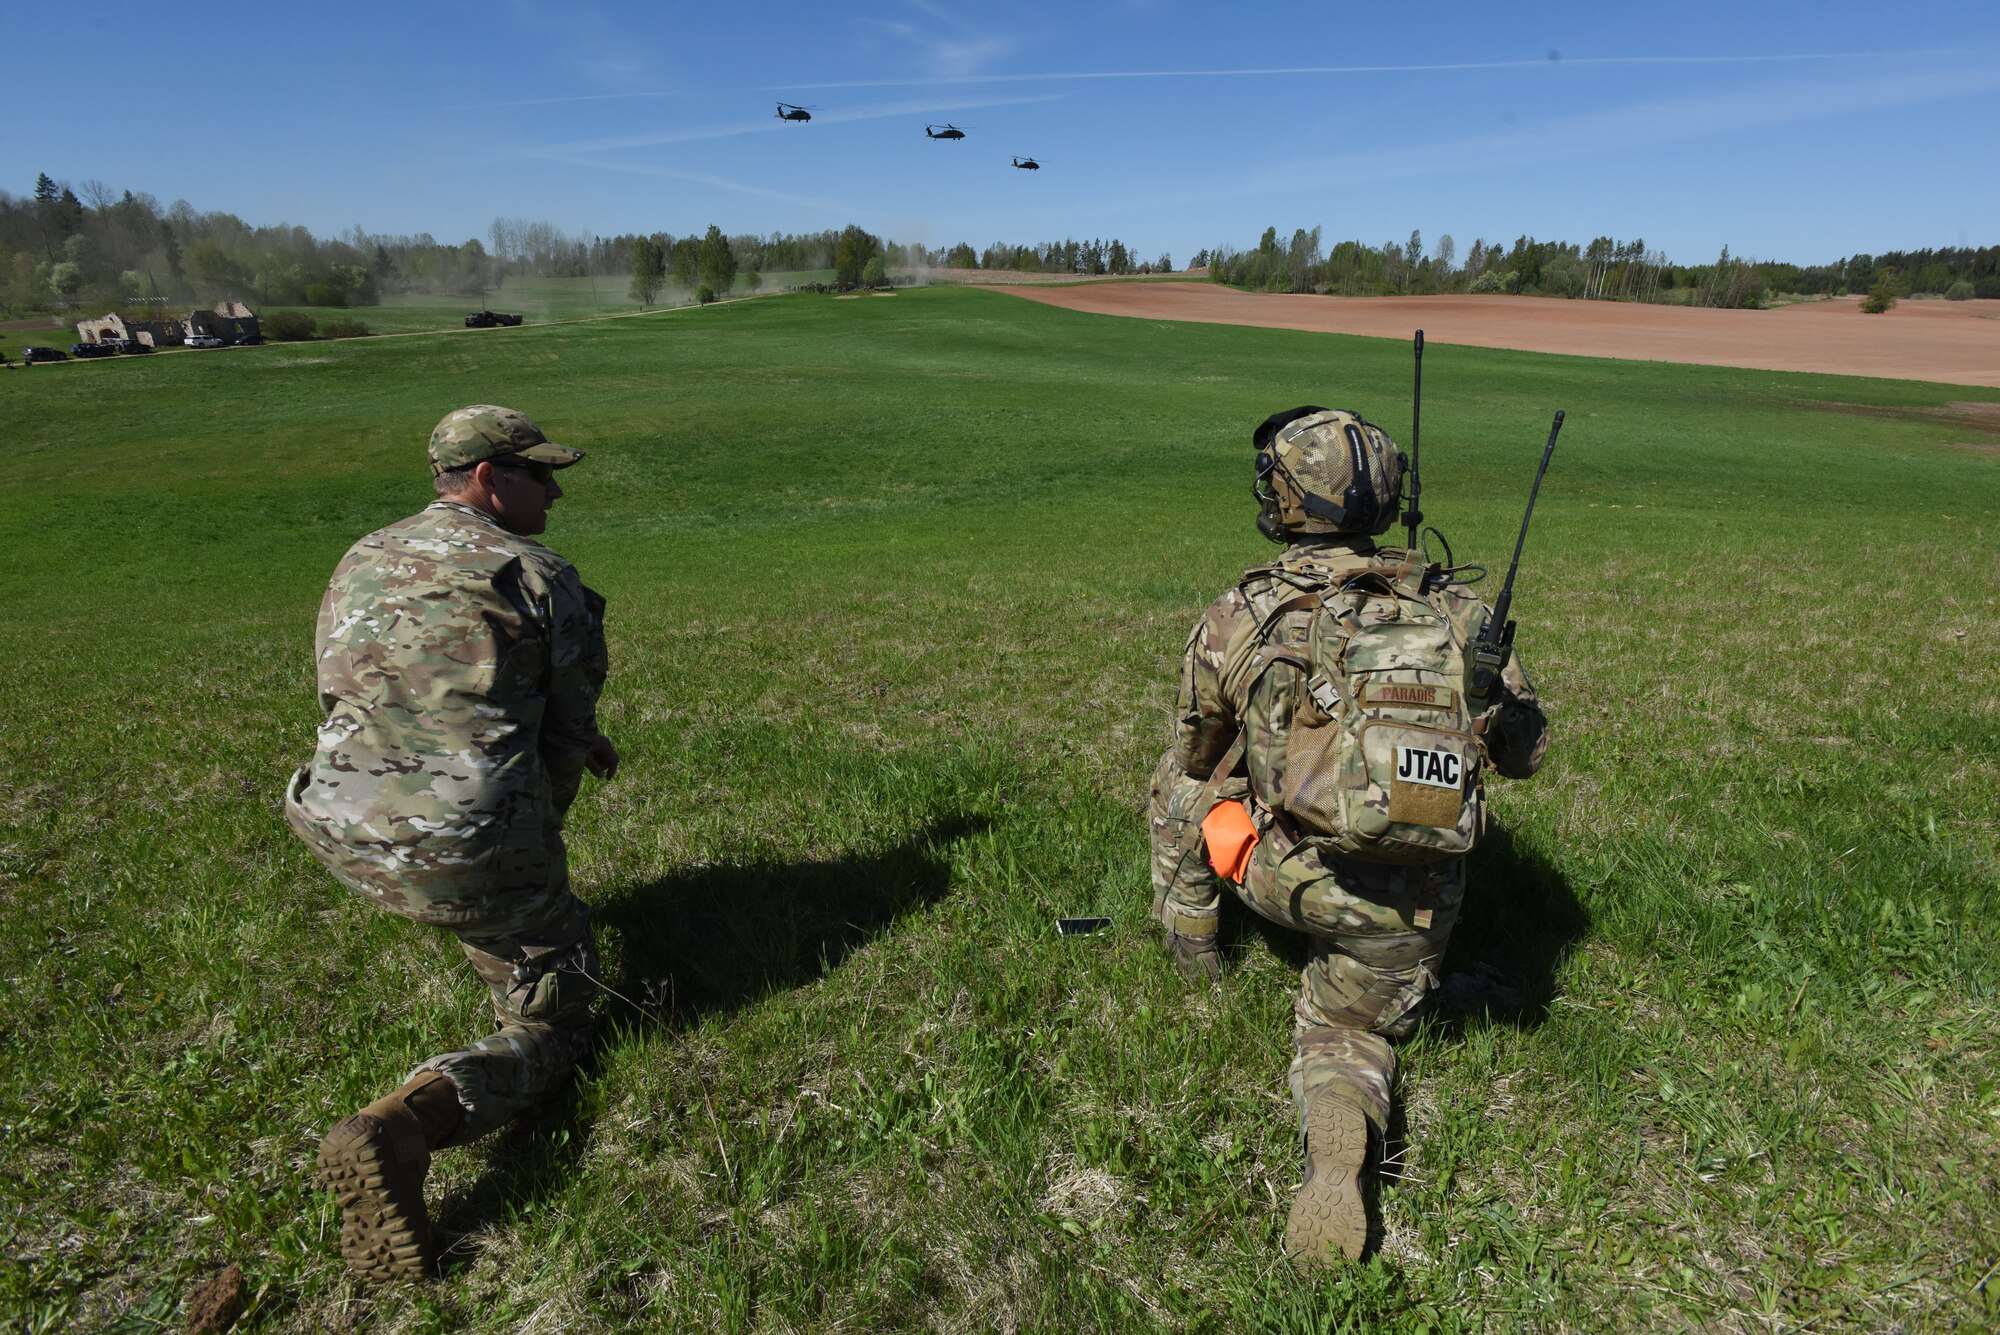 U.S. Air Force Maj. Karl Hurdle, Air Liaison Officer (Left), and Tech Sgt. Laurence Paradis, Tactical Air Control Party member with Okla. National Guard’s 146th Air Support Operations Squadron, advises Estonian Defense Force on Joint Terminal Attack Controller capabilities May 9th during Exercise HEDGEHOG 2018 in Southern Estonia. The TACP personnel served as advisers to the Estonian Defense Force to create combined fires between U.S. Army and multinational aviation assets.  Photo By Maj. Kurt M. Rauschenberg, 58th EMIB Public Affairs Officer.